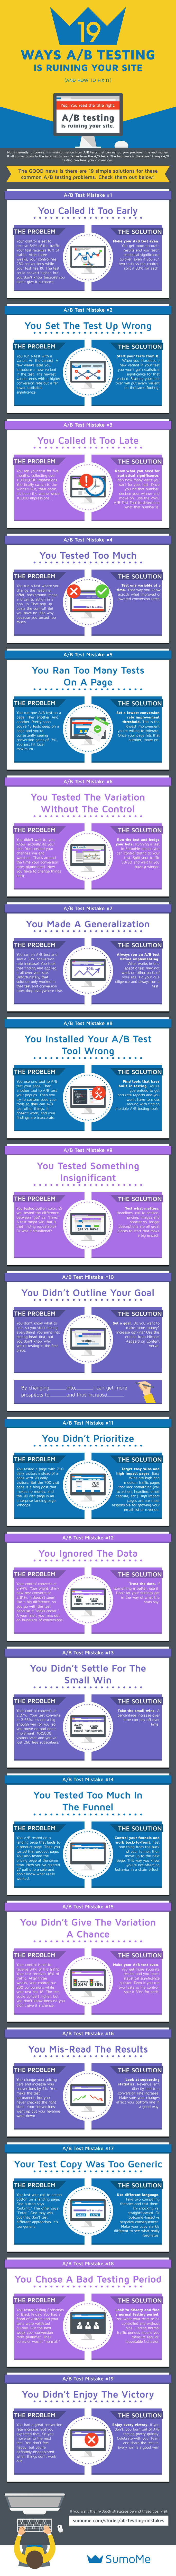 A/B Testing Mistakes Infographic